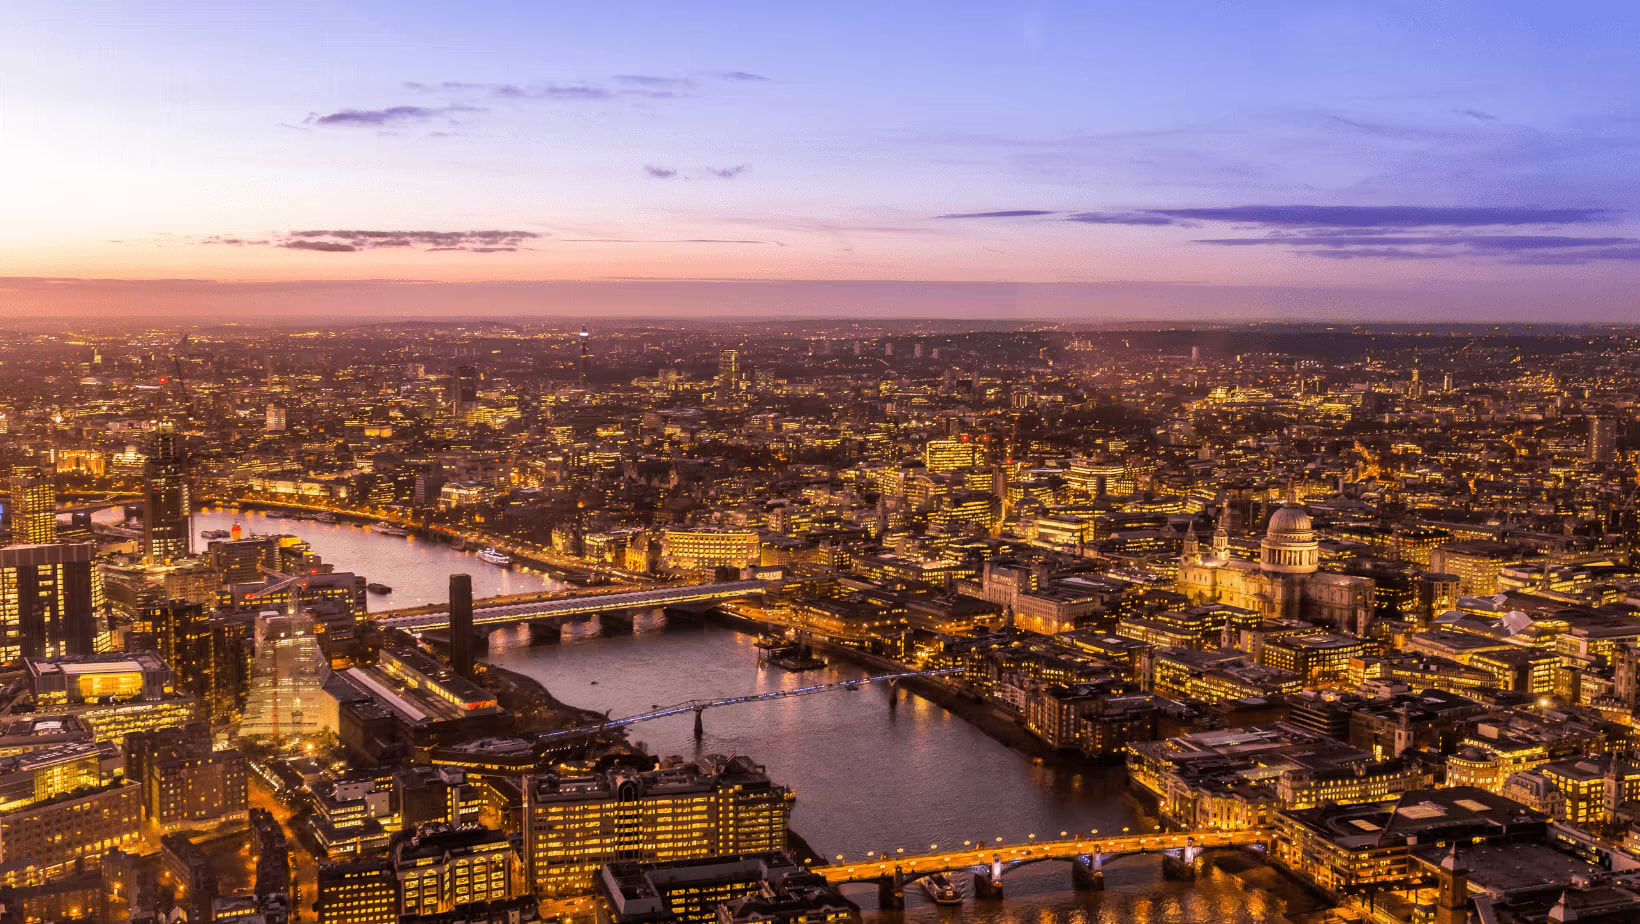 Top view of London at sunset